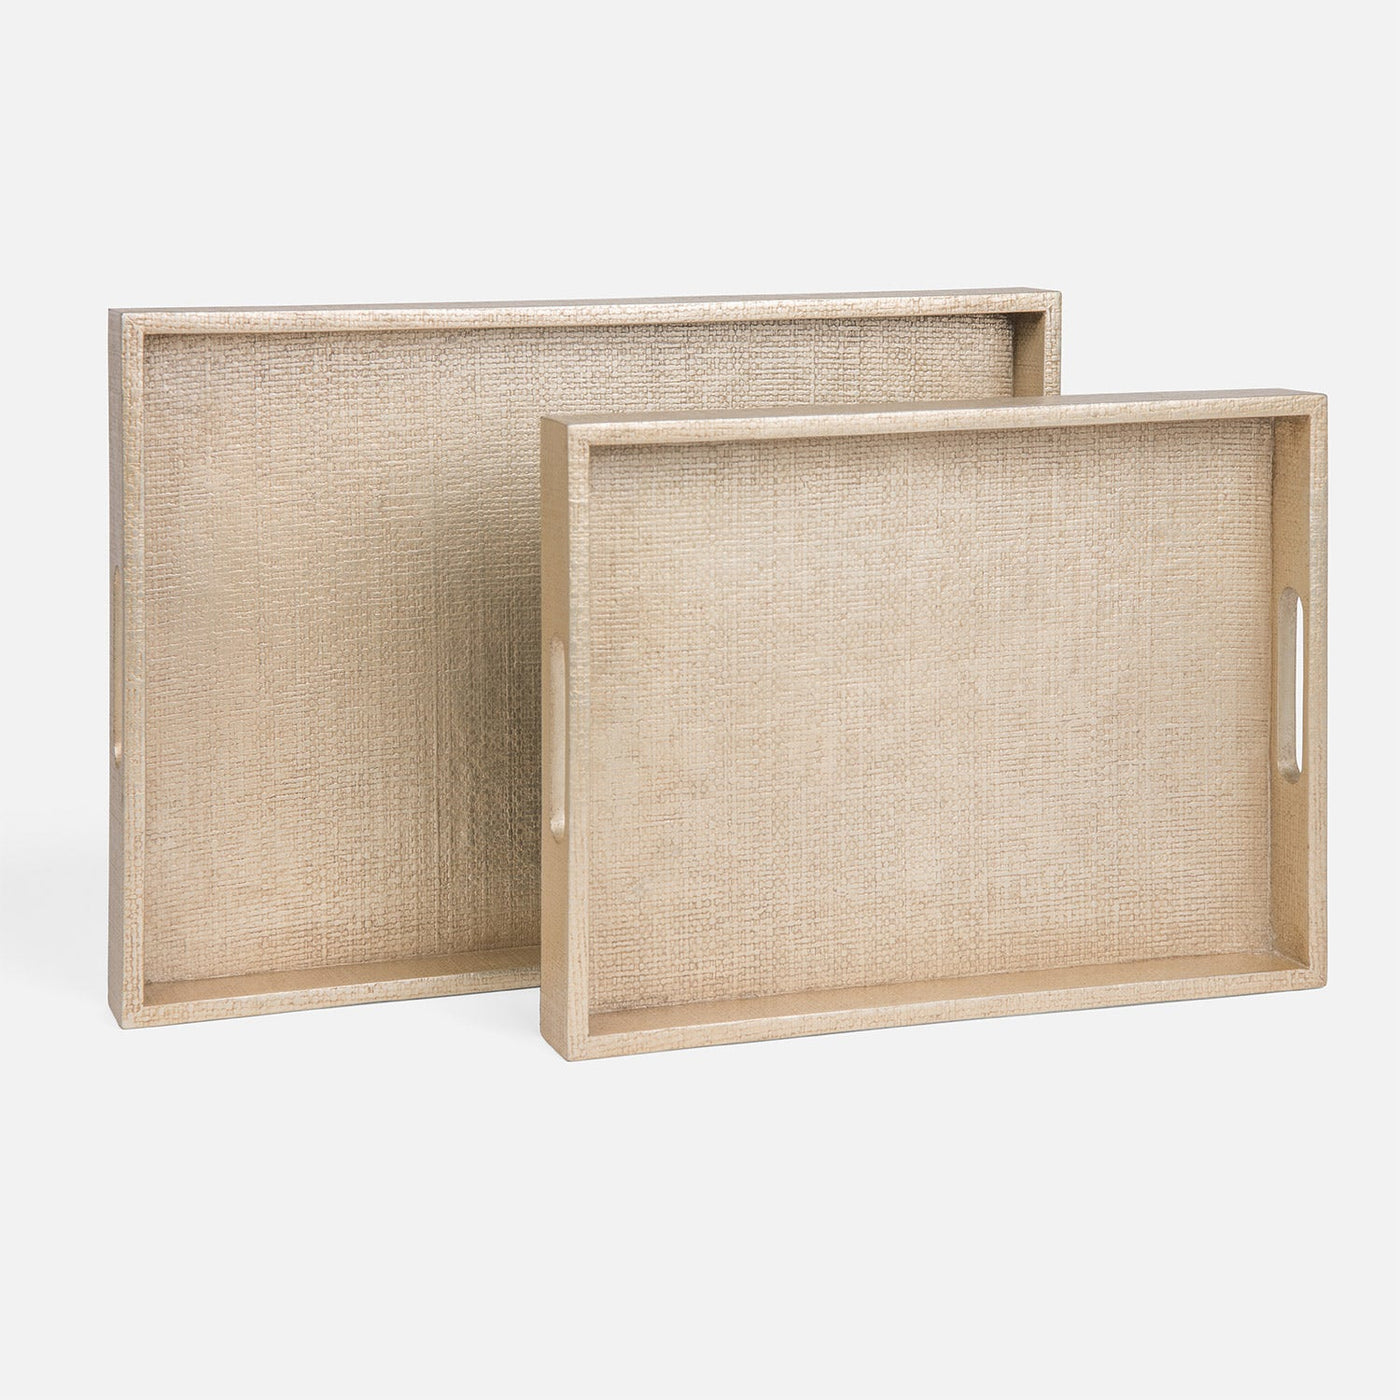 TRAY CHAMPAGNE FAUX RAFFIA (Available in 2 Sizes)